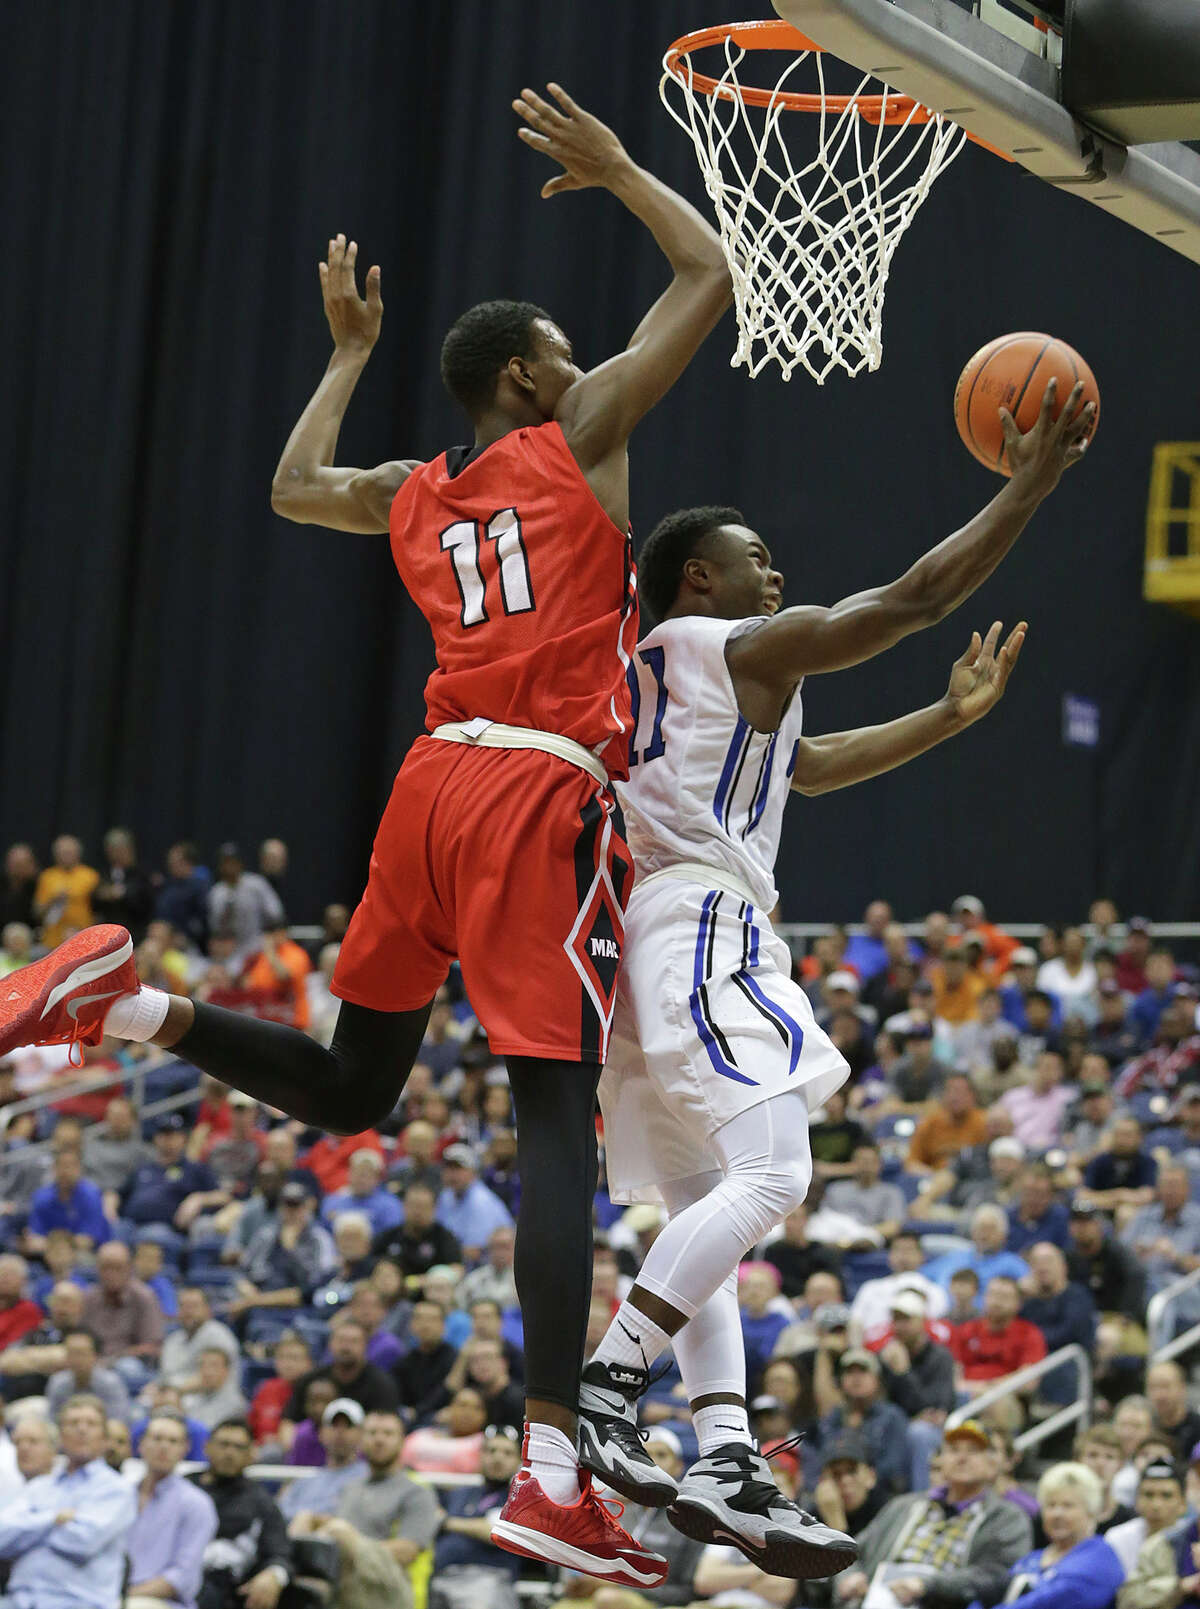 Plano West guard Derrick Aimes tries to get under Irving MacArthur defender Josh Hawley in the 6A semifinals of the UIL state basketball tournament at the Alamodome in San Antonio on March 13, 2015.